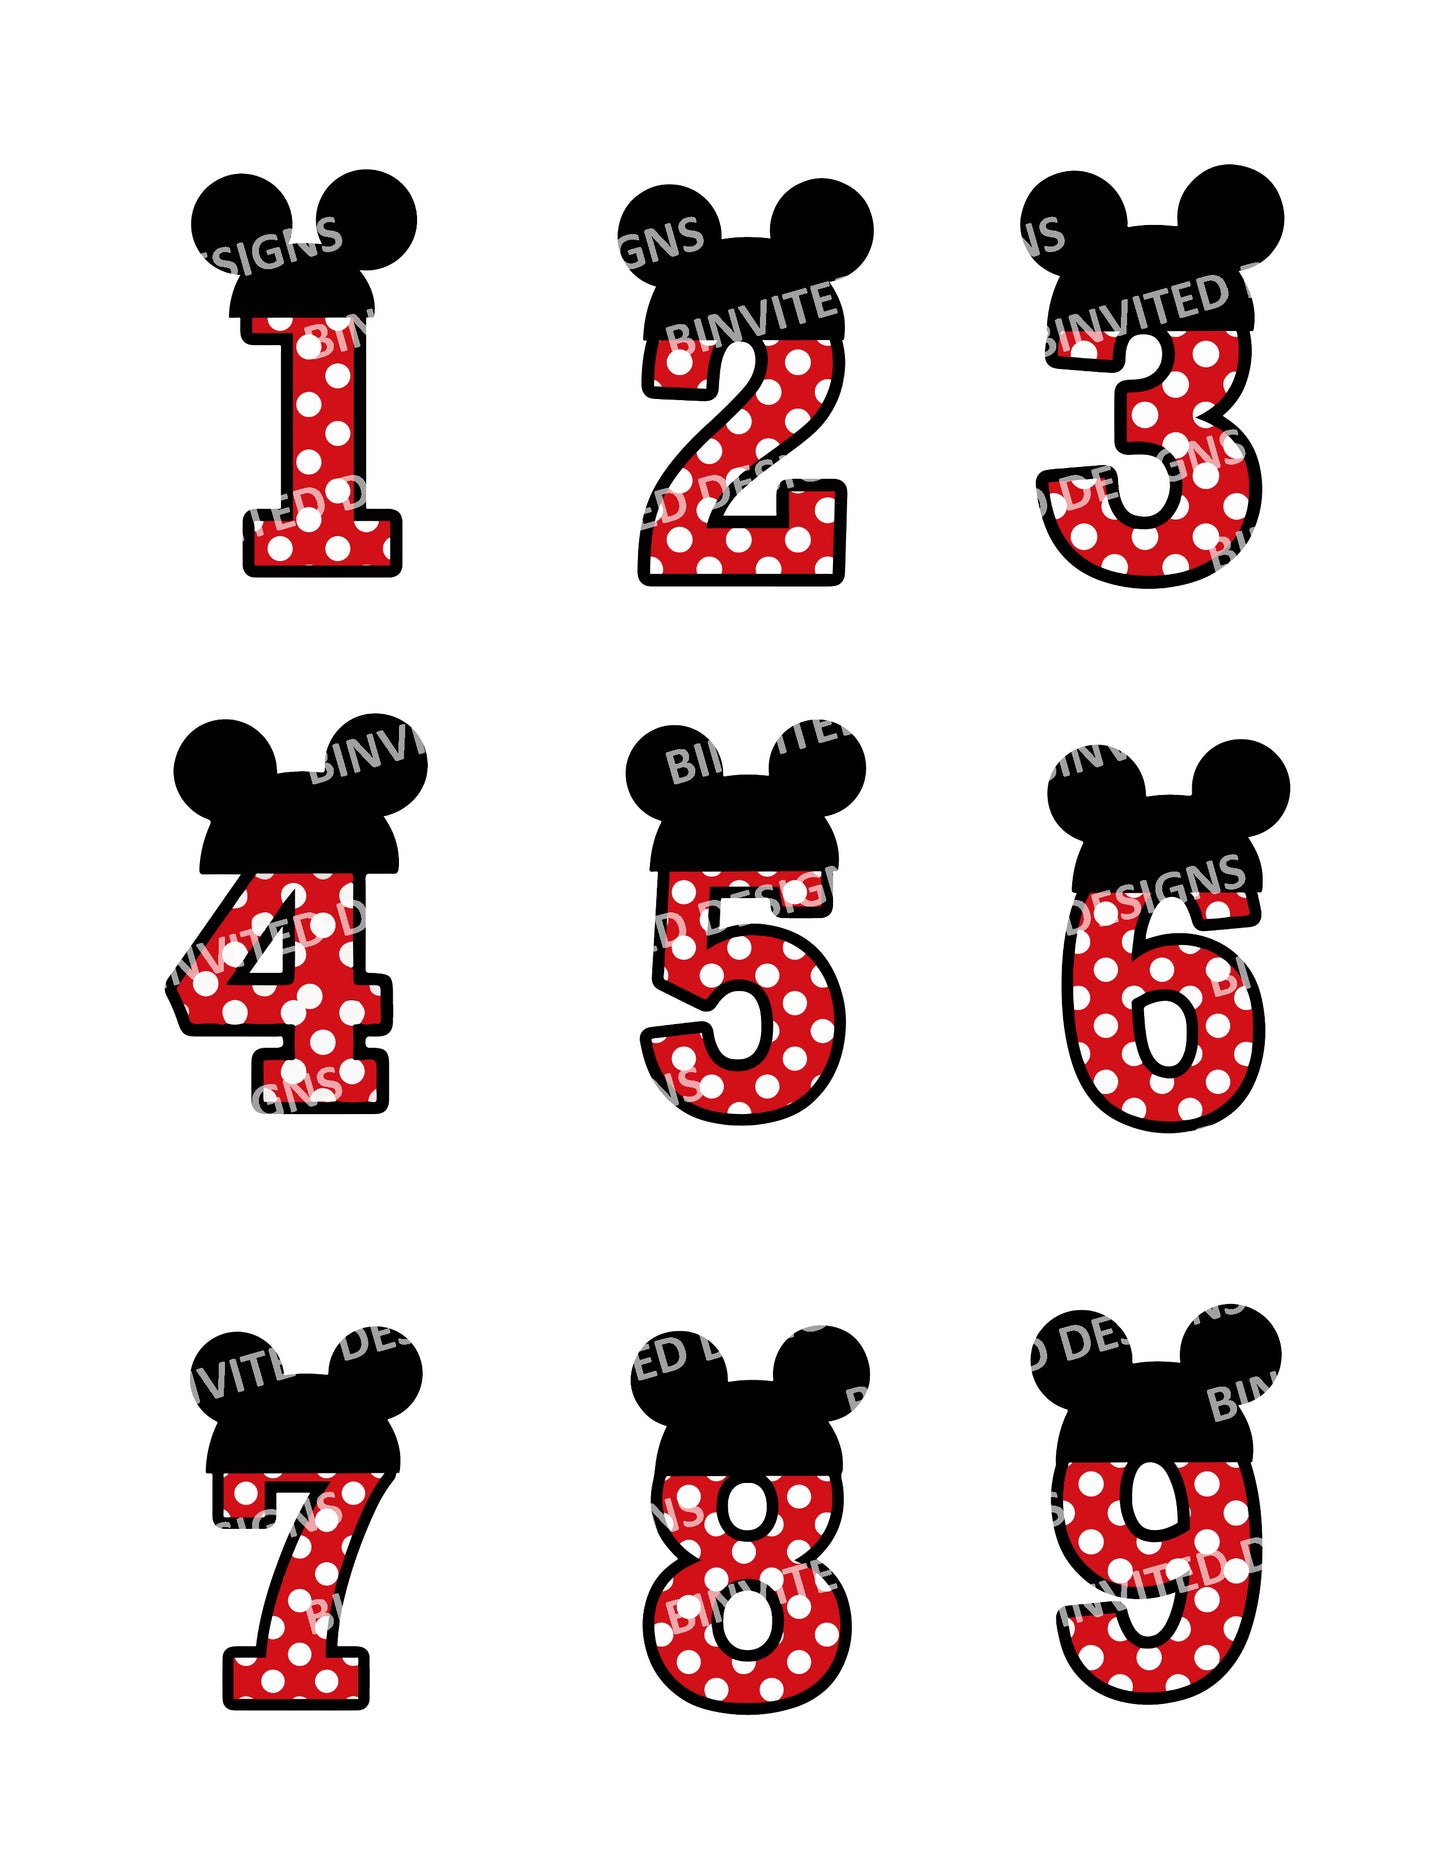 MICKEY & MINNIE MOUSE Digital or Printed Birthday Number Custom Stickers for Gift Bag, Party Favors!